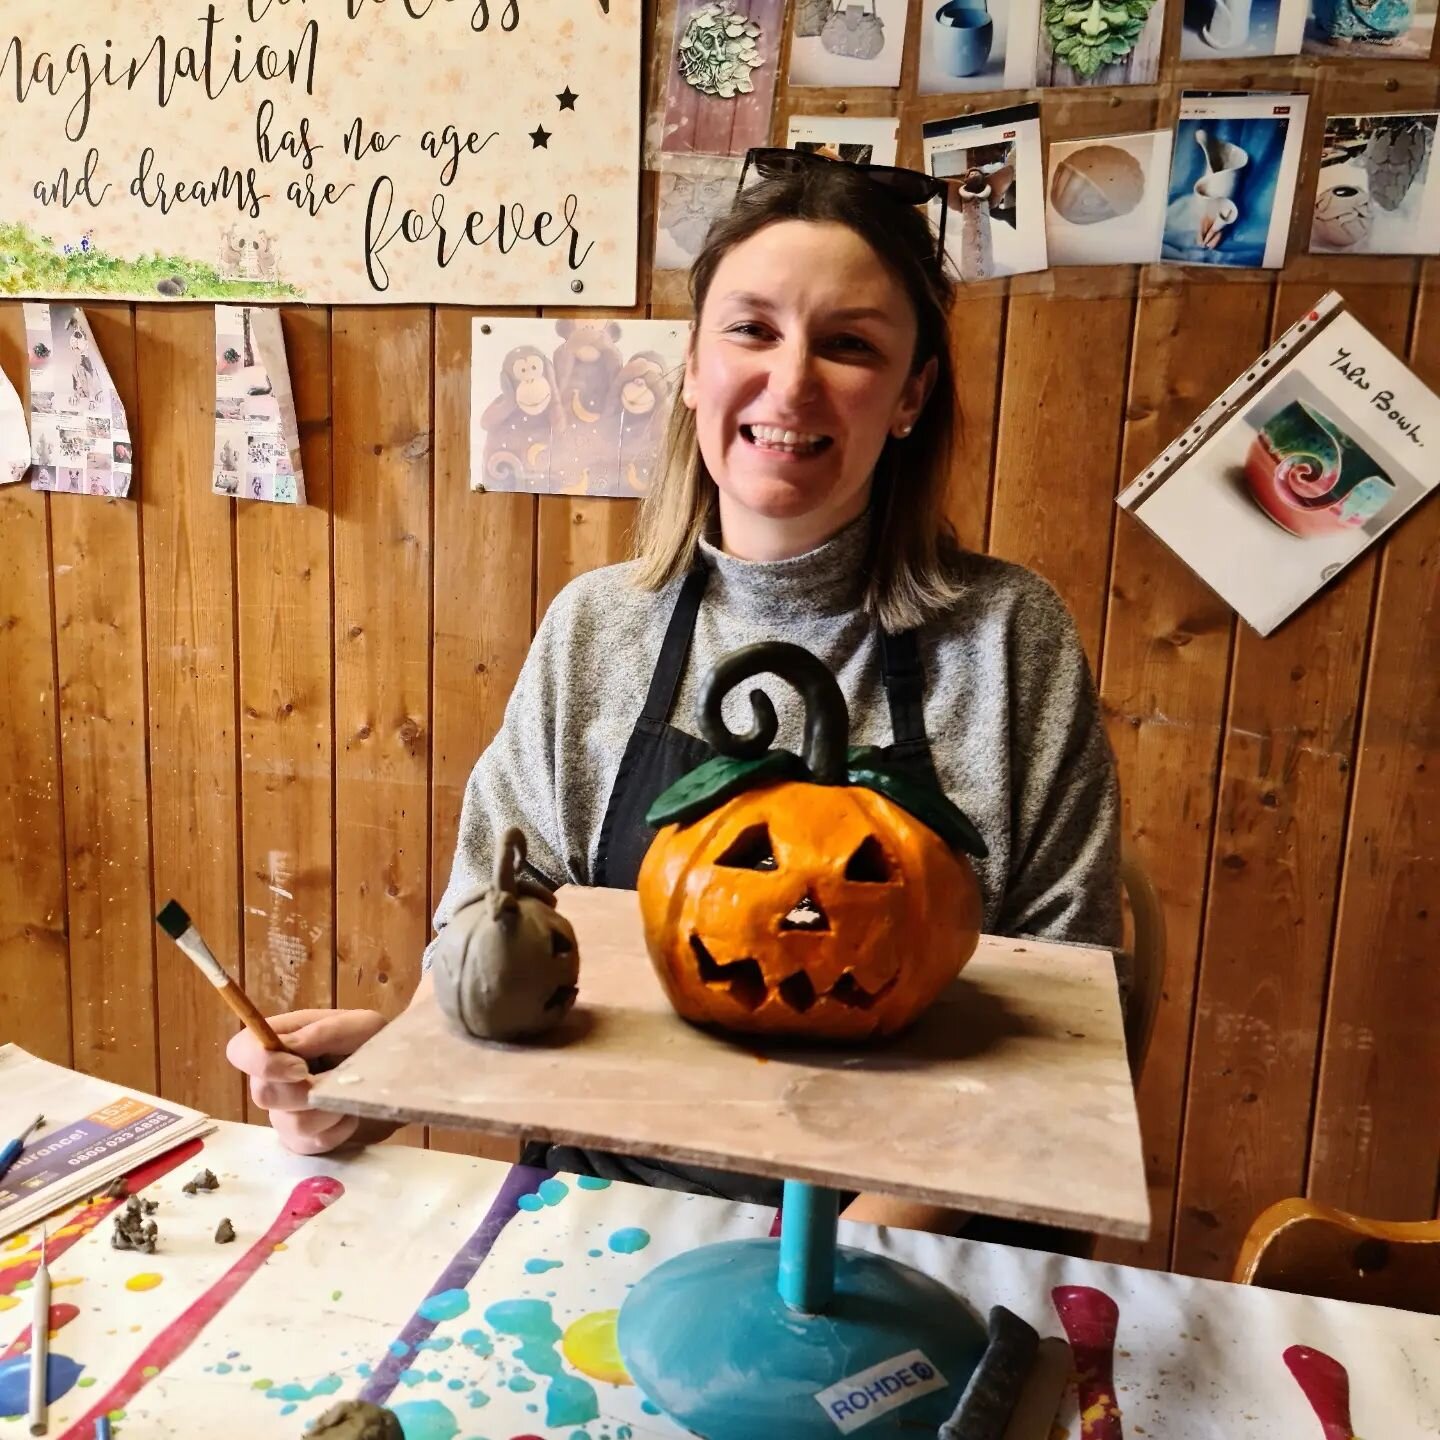 🎃 Happy Halloween everyone 🎃 

Nicola and Robert had a fab time making clay pumpkins this year with the lovely people at Pear Tree Pottery. Well worth a visit if you're in the area. 

We think they've turned out great 😁

#halloween #pumpkin #clay 